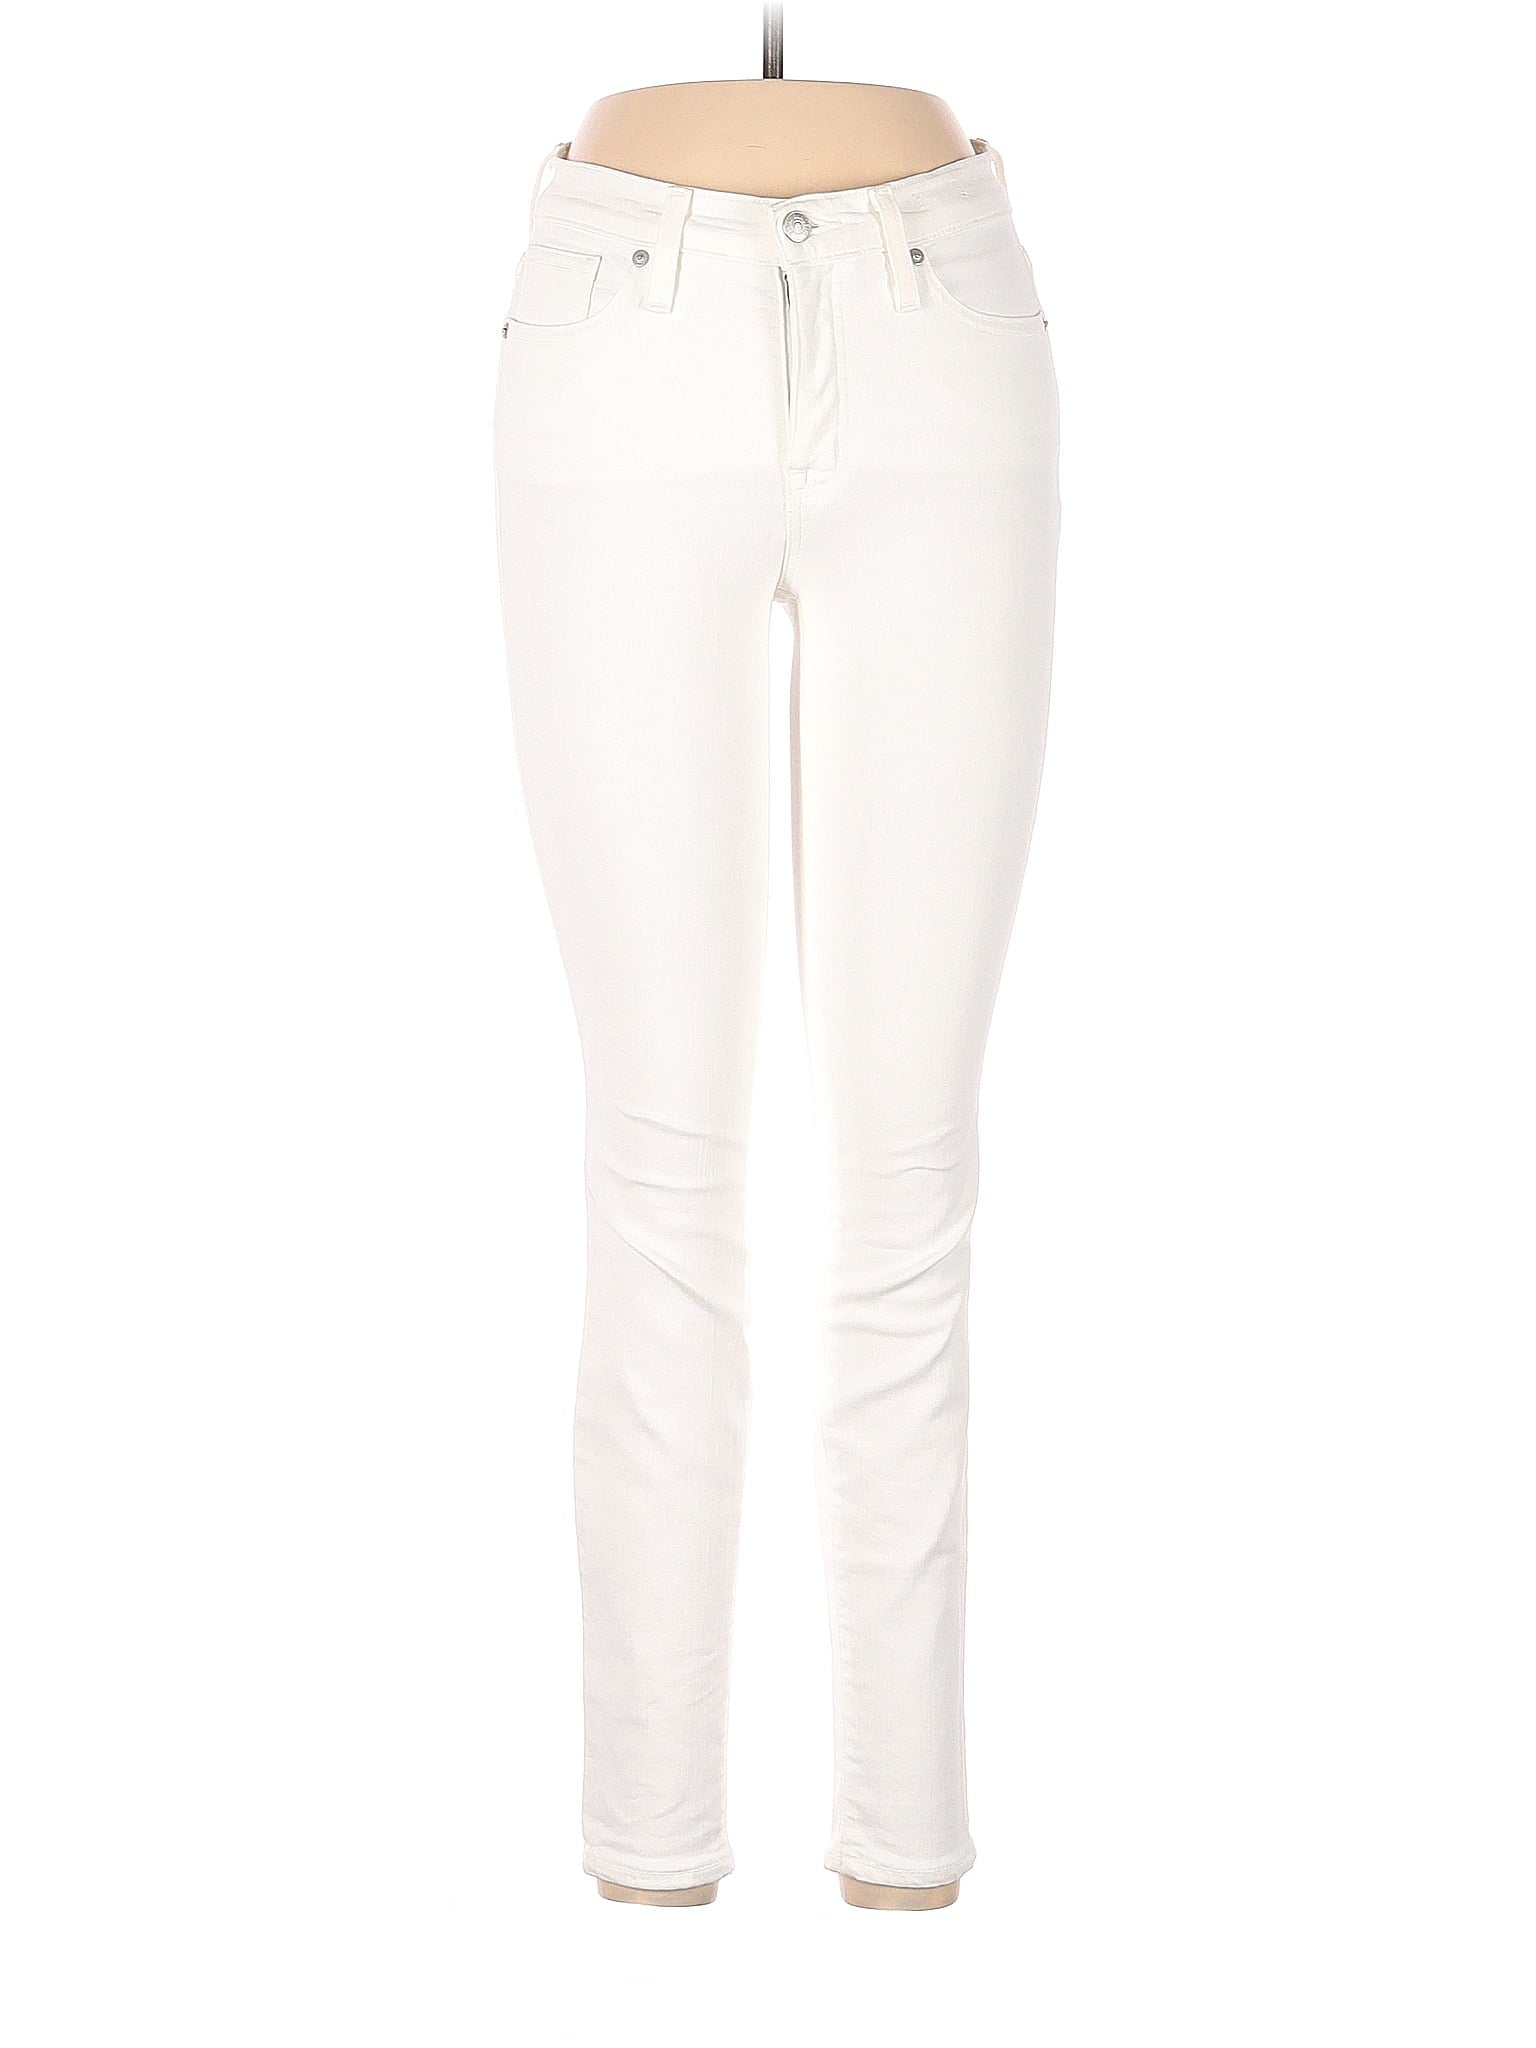 High-Rise Boyjeans 9" Mid-Rise Skinny Jeans In Pure White in Light Wash waist size - 26